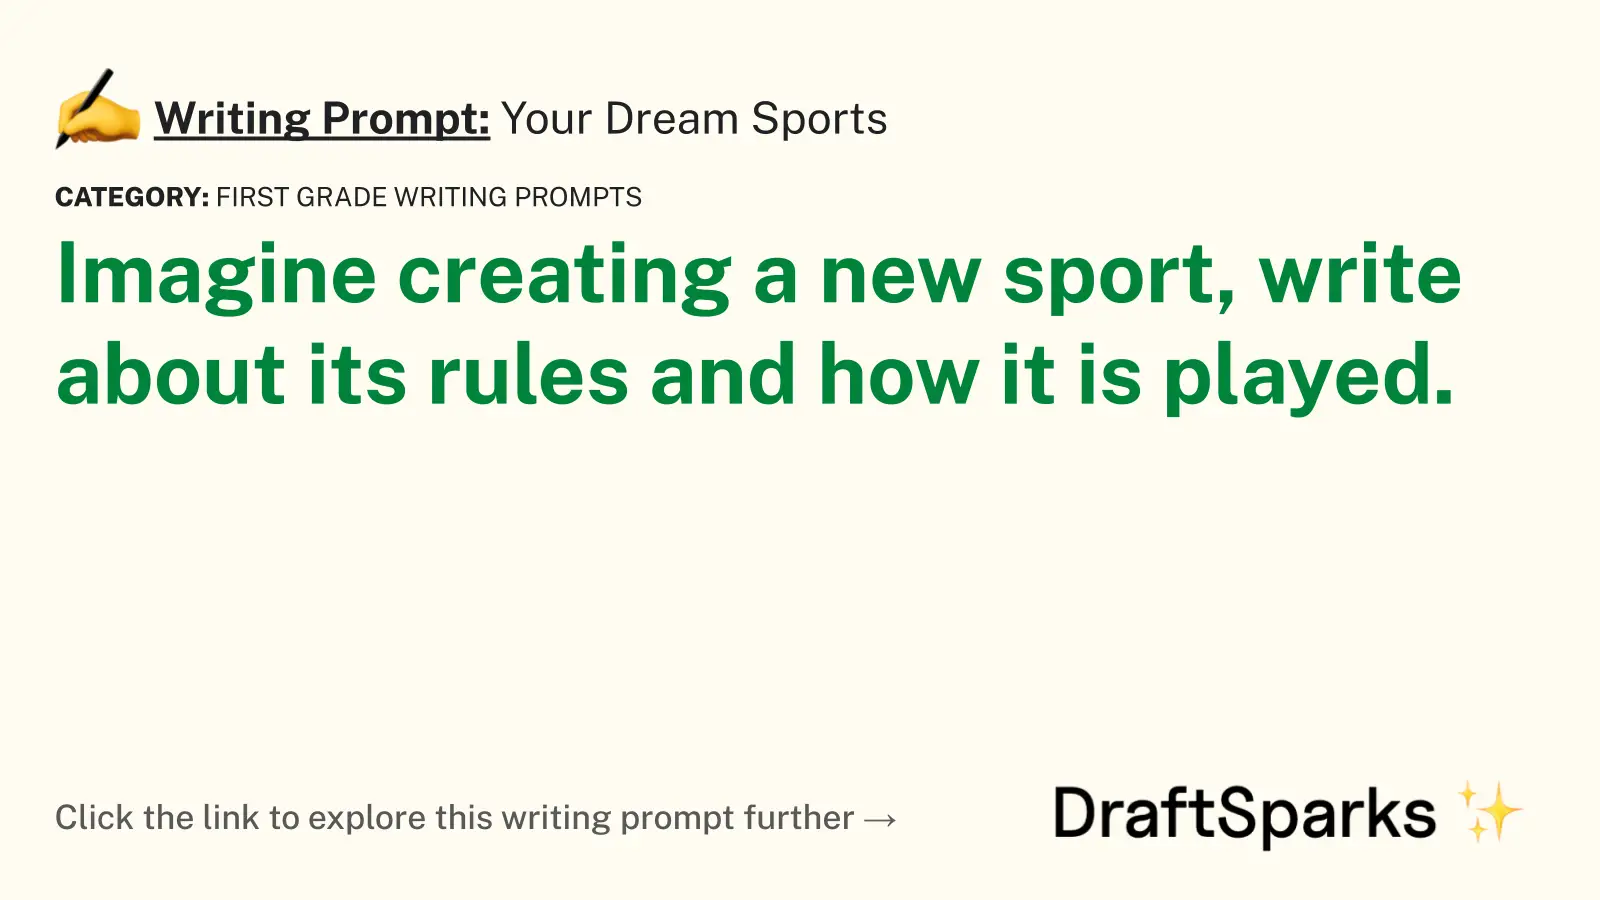 Your Dream Sports